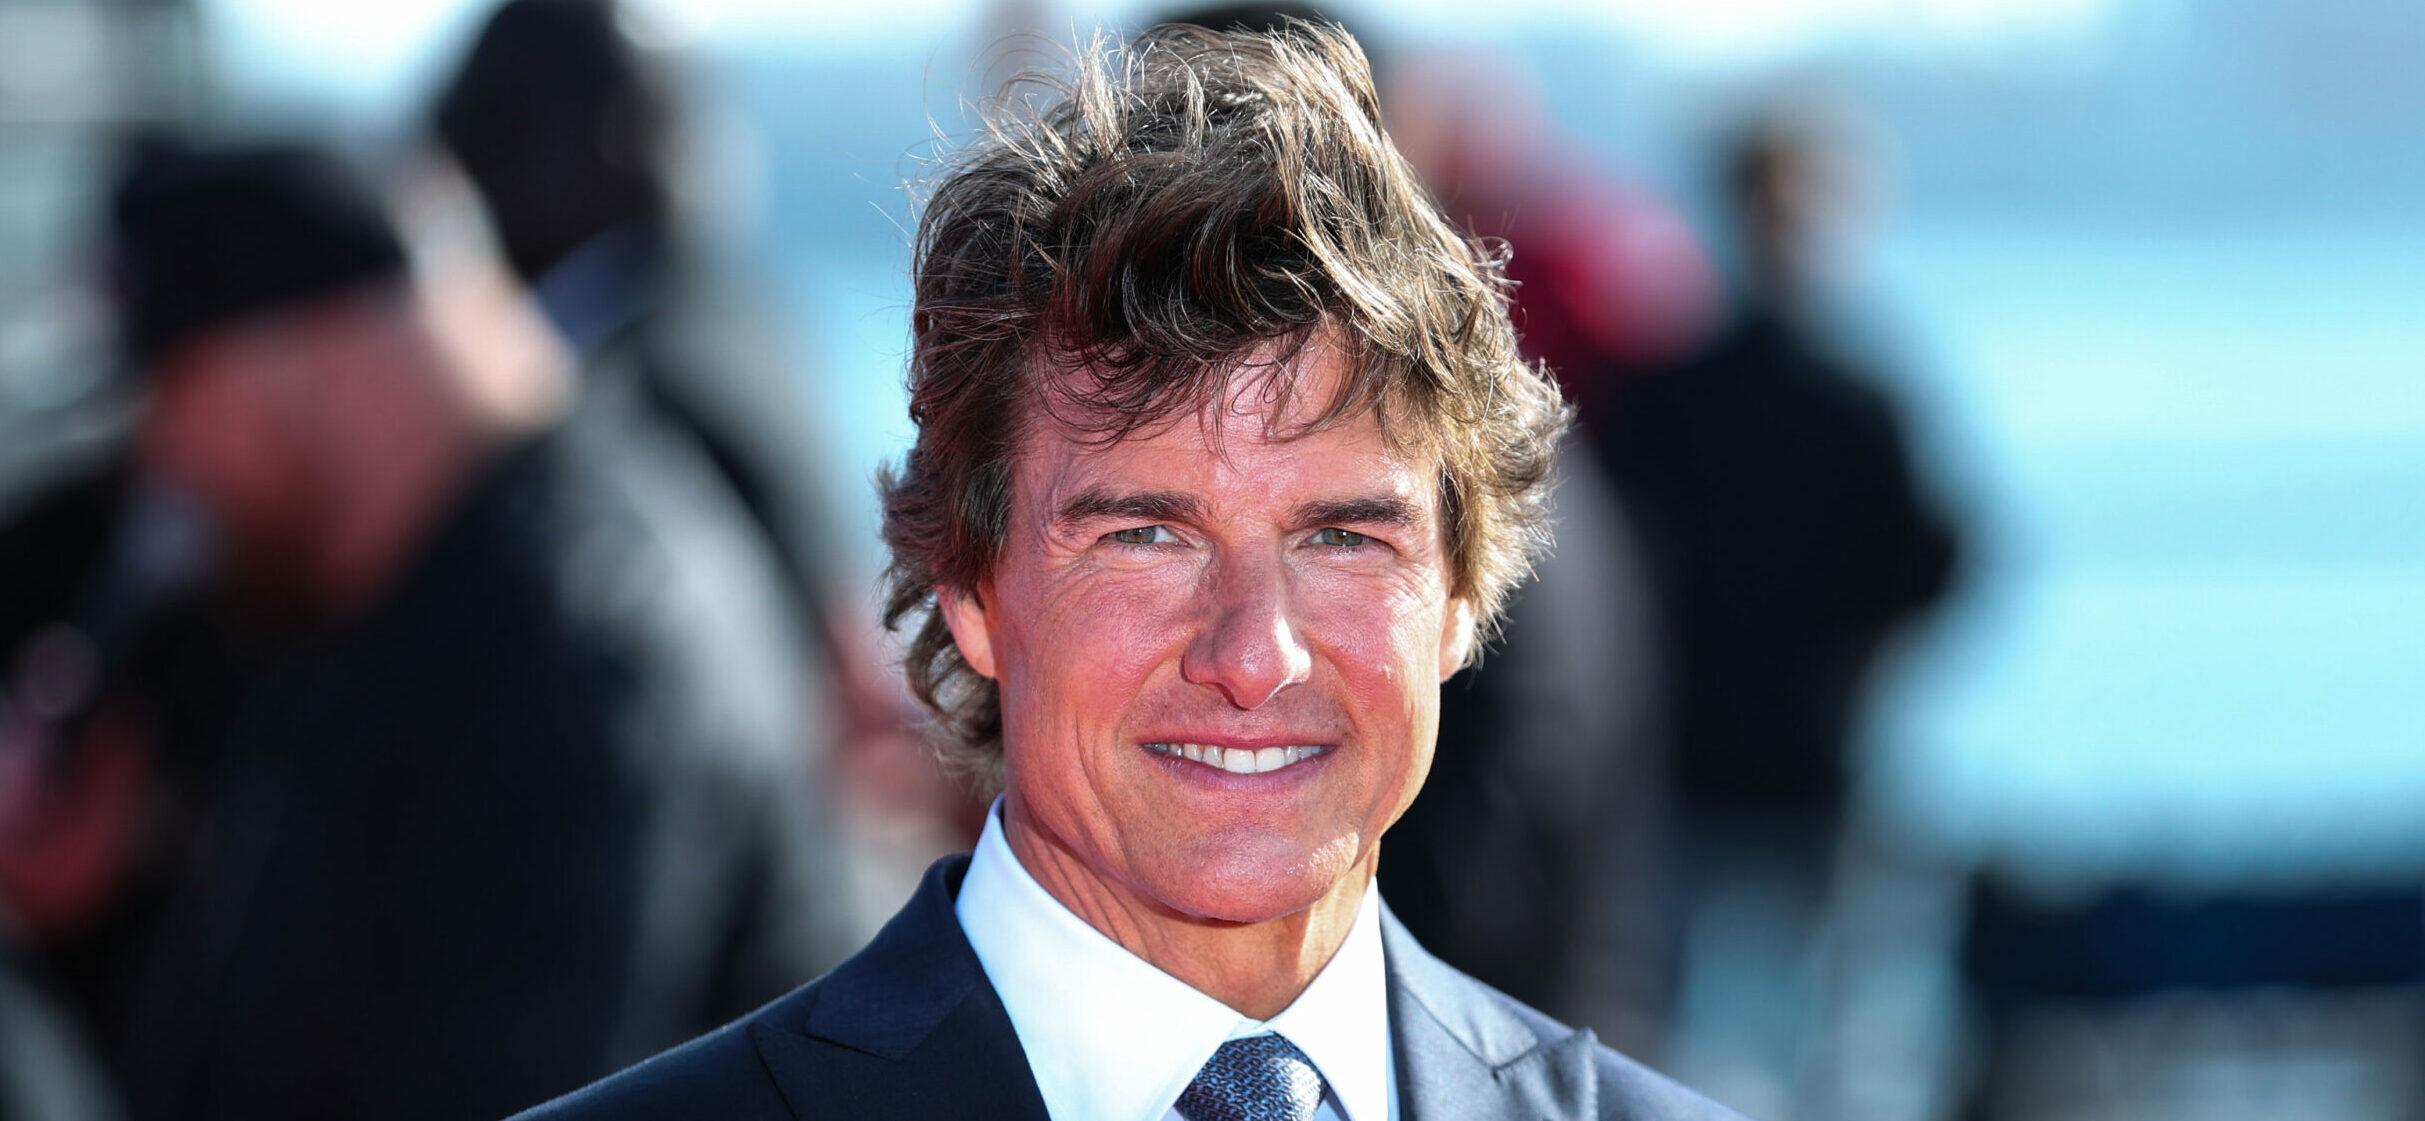 World Premiere Of Paramount Pictures' 'Top Gun: Maverick' held at the USS Midway Museum on May 4, 2022 in San Diego, California, United States. 05 May 2022 Pictured: Tom Cruise.